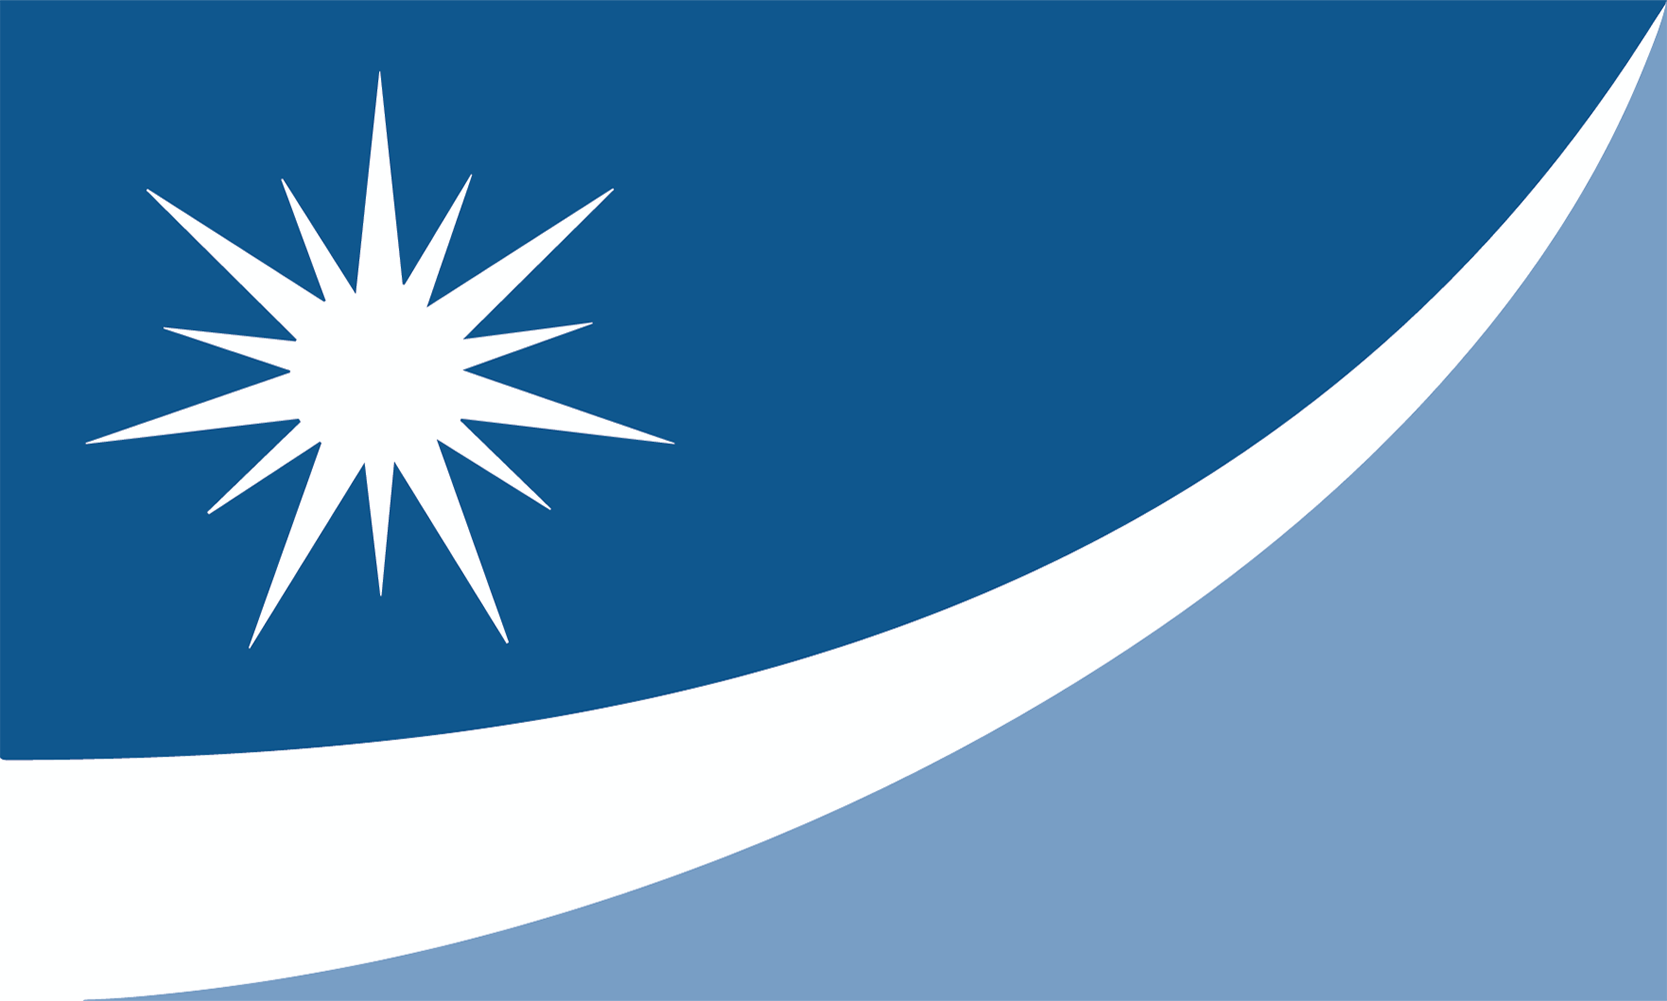 The Flag of Crystal